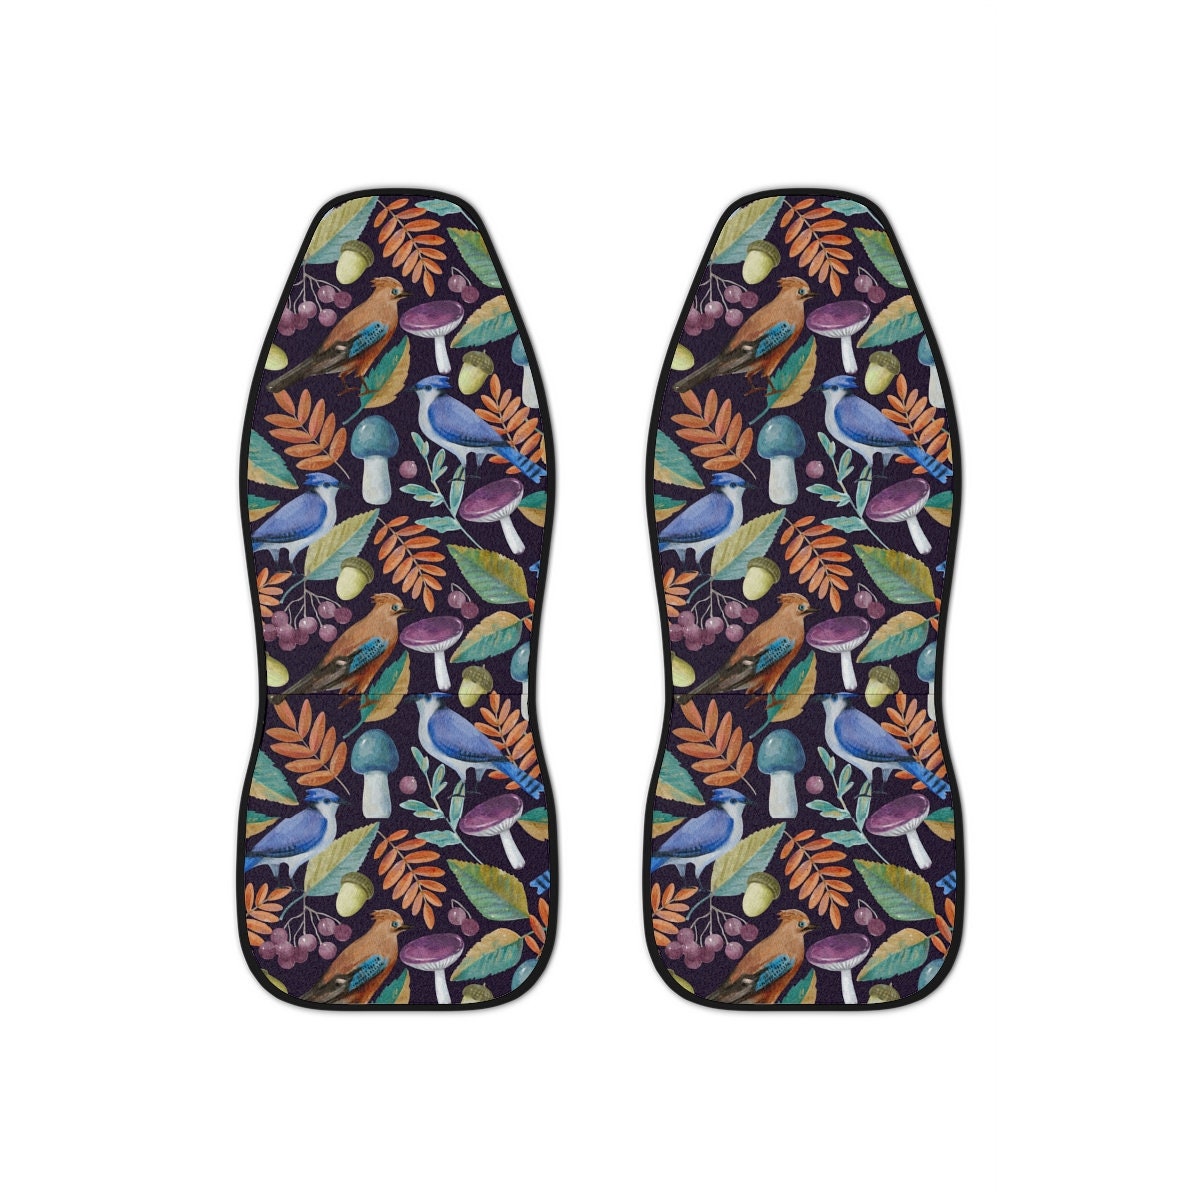 Seat Covers for Cars, Vintage Mushroom Boho Car Seat Cover, Cute Hippie Car Accessories for Women, Bohemian Universal Vehicle Seat Protector HMDesignStudioUS